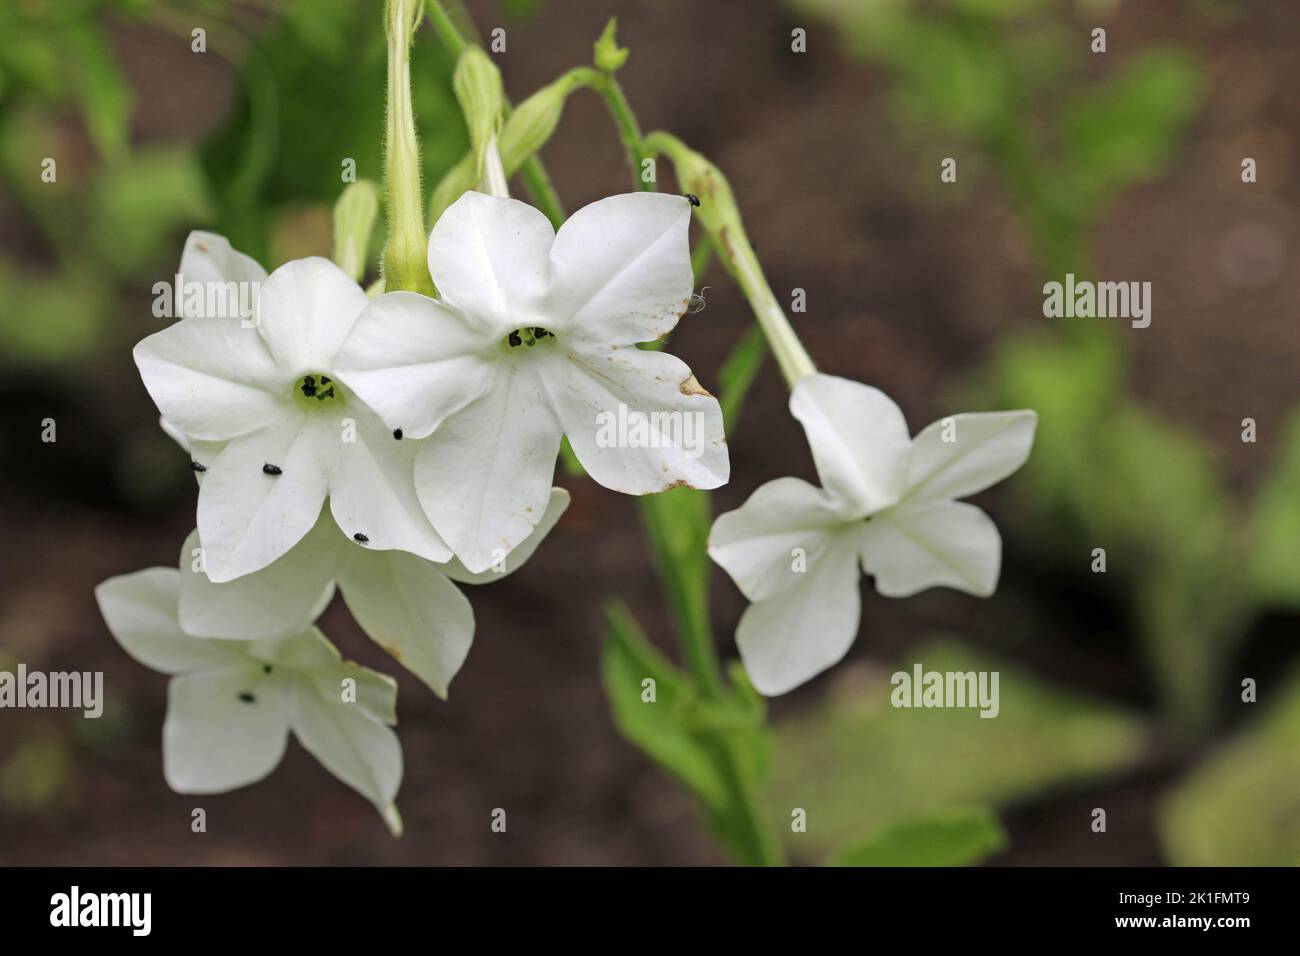 White tobacco plant, Nicotiana species, flowers in close up with a blurred background of leaves. Stock Photo